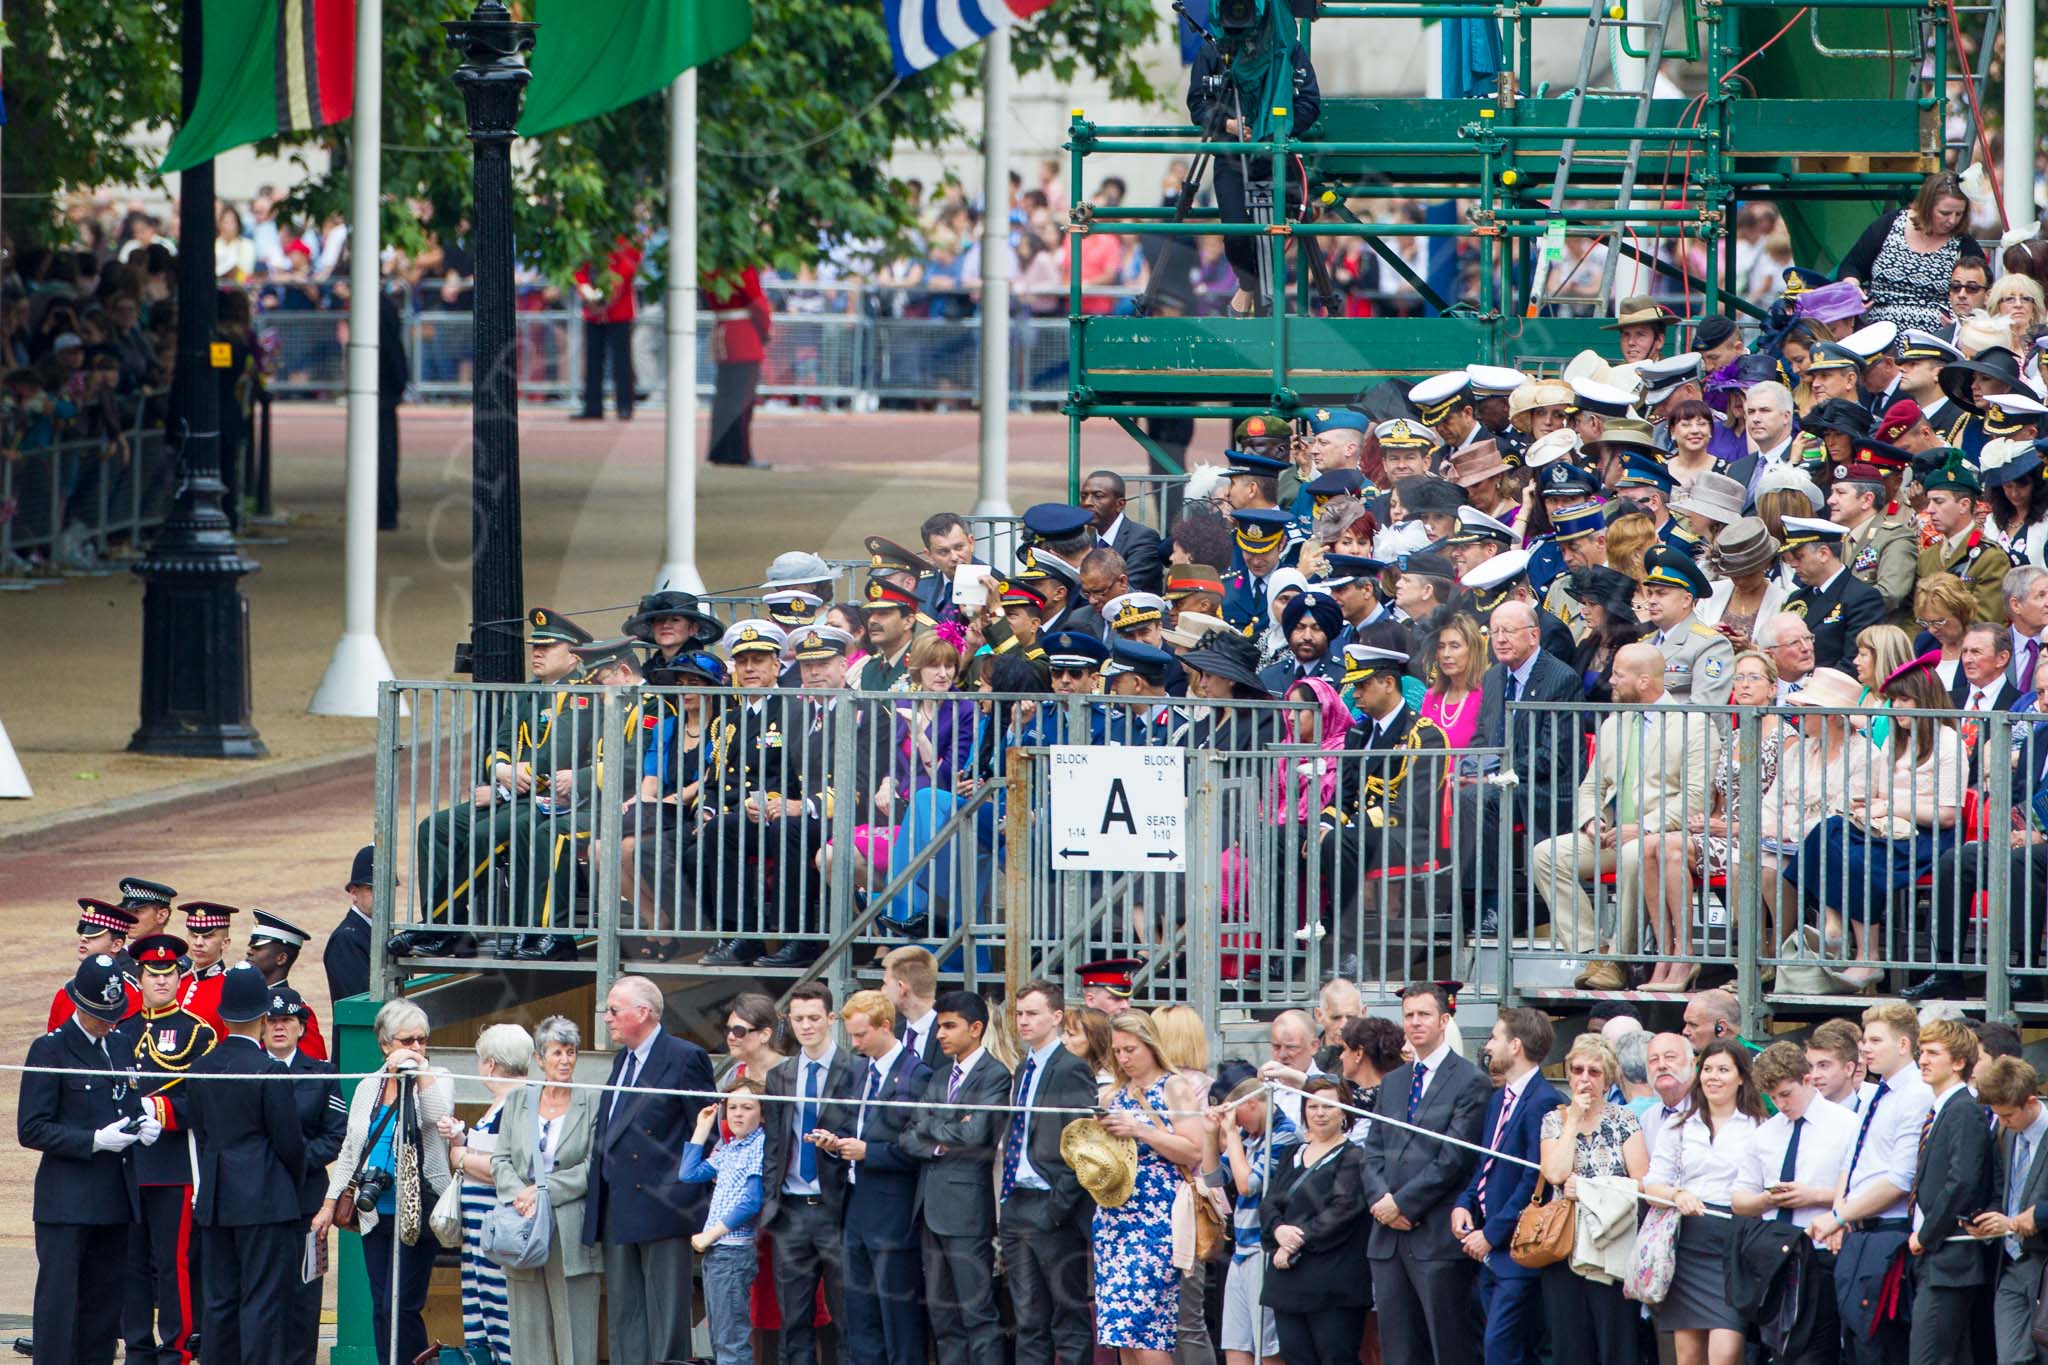 Trooping the Colour 2014.
Horse Guards Parade, Westminster,
London SW1A,

United Kingdom,
on 14 June 2014 at 10:34, image #213